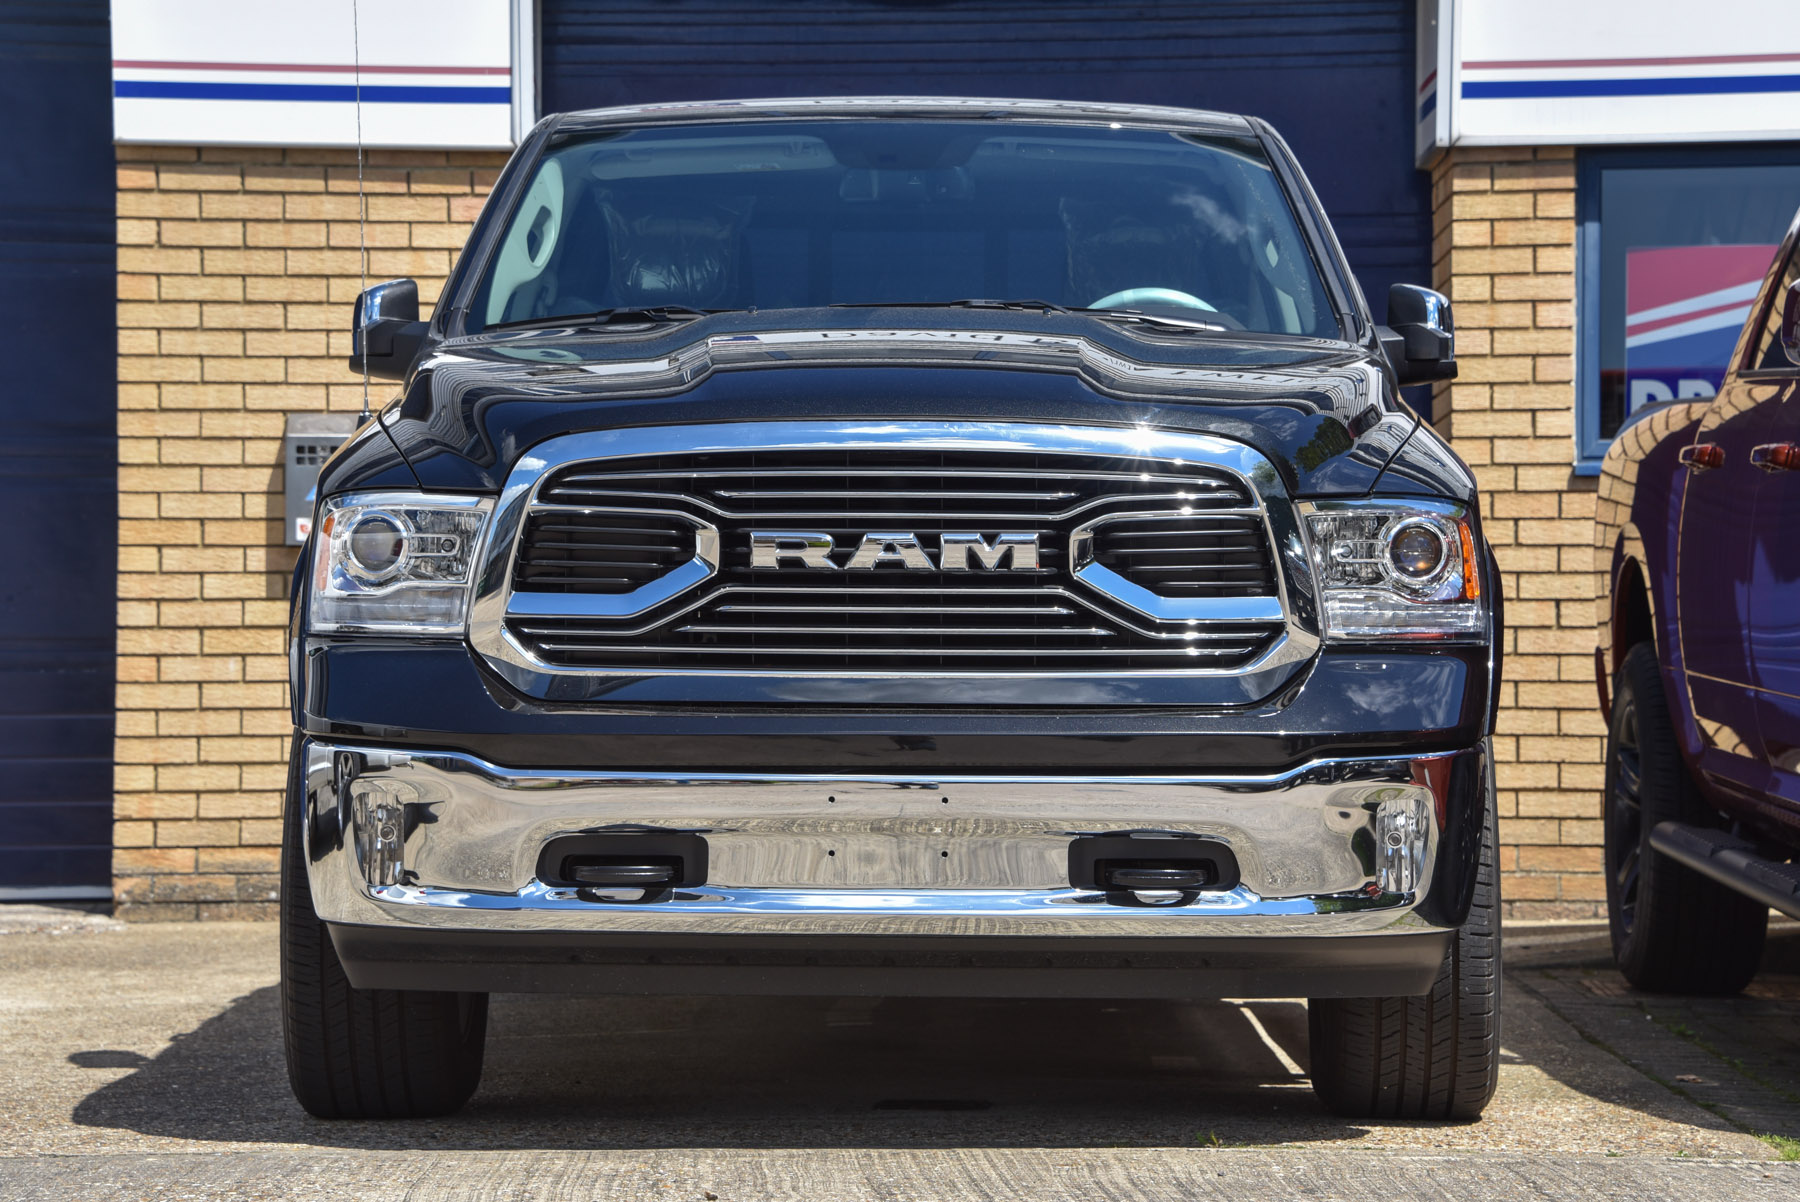 New top of the range Dodge Ram Limited